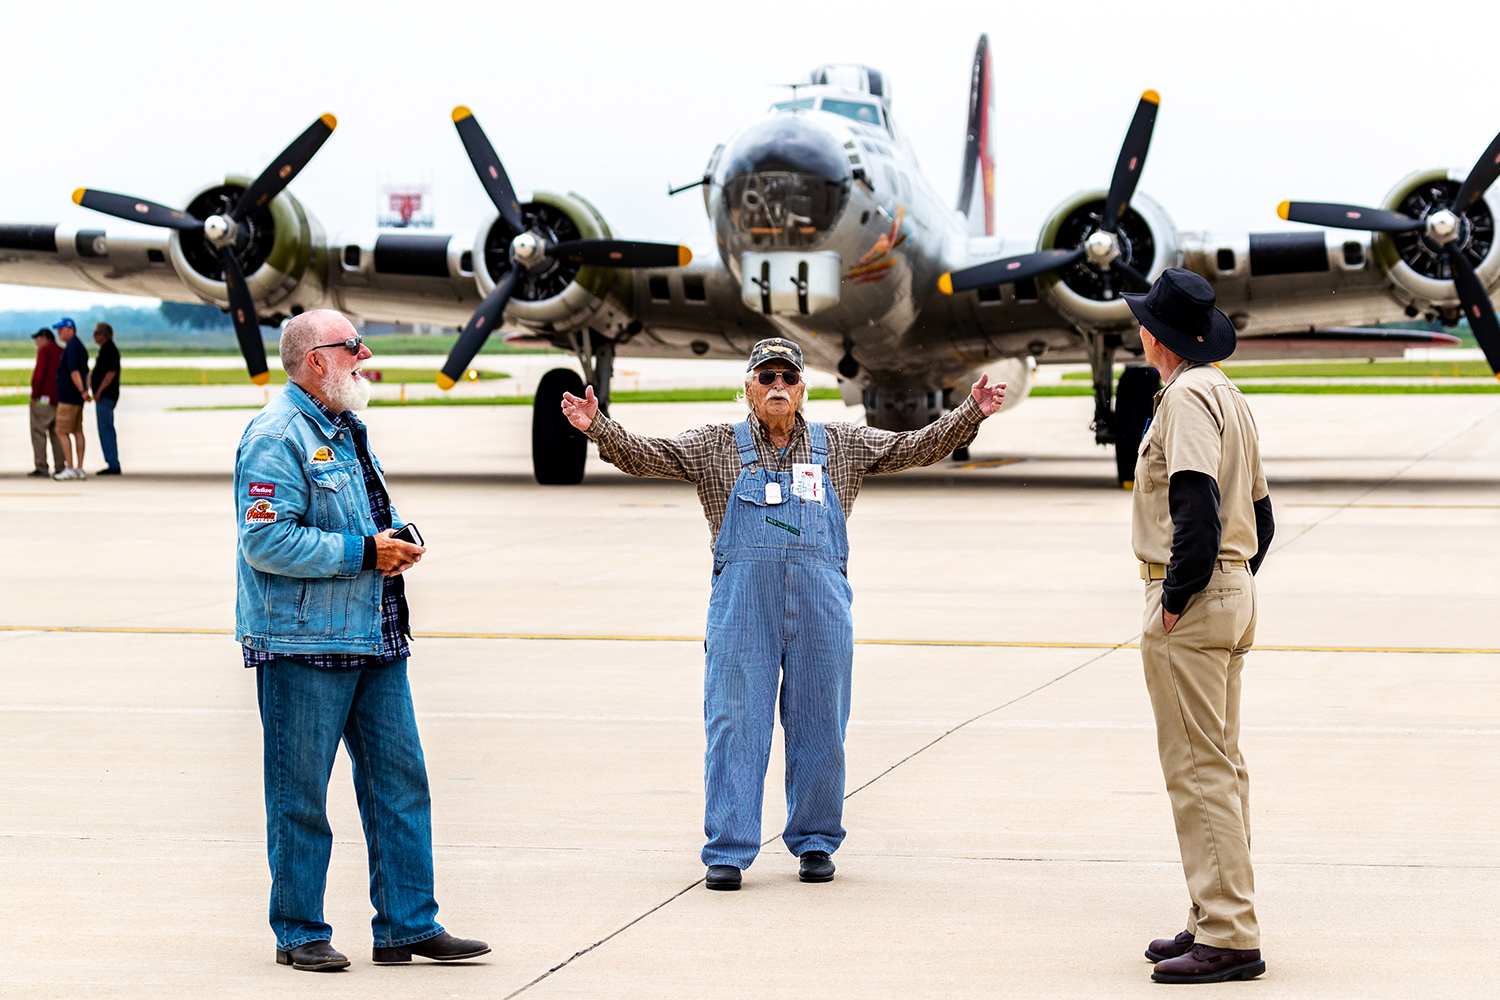  Robert H. Clark of Cedar Rapids shares a story with the crew of the Experimental Aircraft Association's B-17G bomber 'Aluminum Overcast' at the Eastern Iowa Airport in Cedar Rapids on Tuesday, June 18, 2019. Clark flew 53 missions as a ball turret g